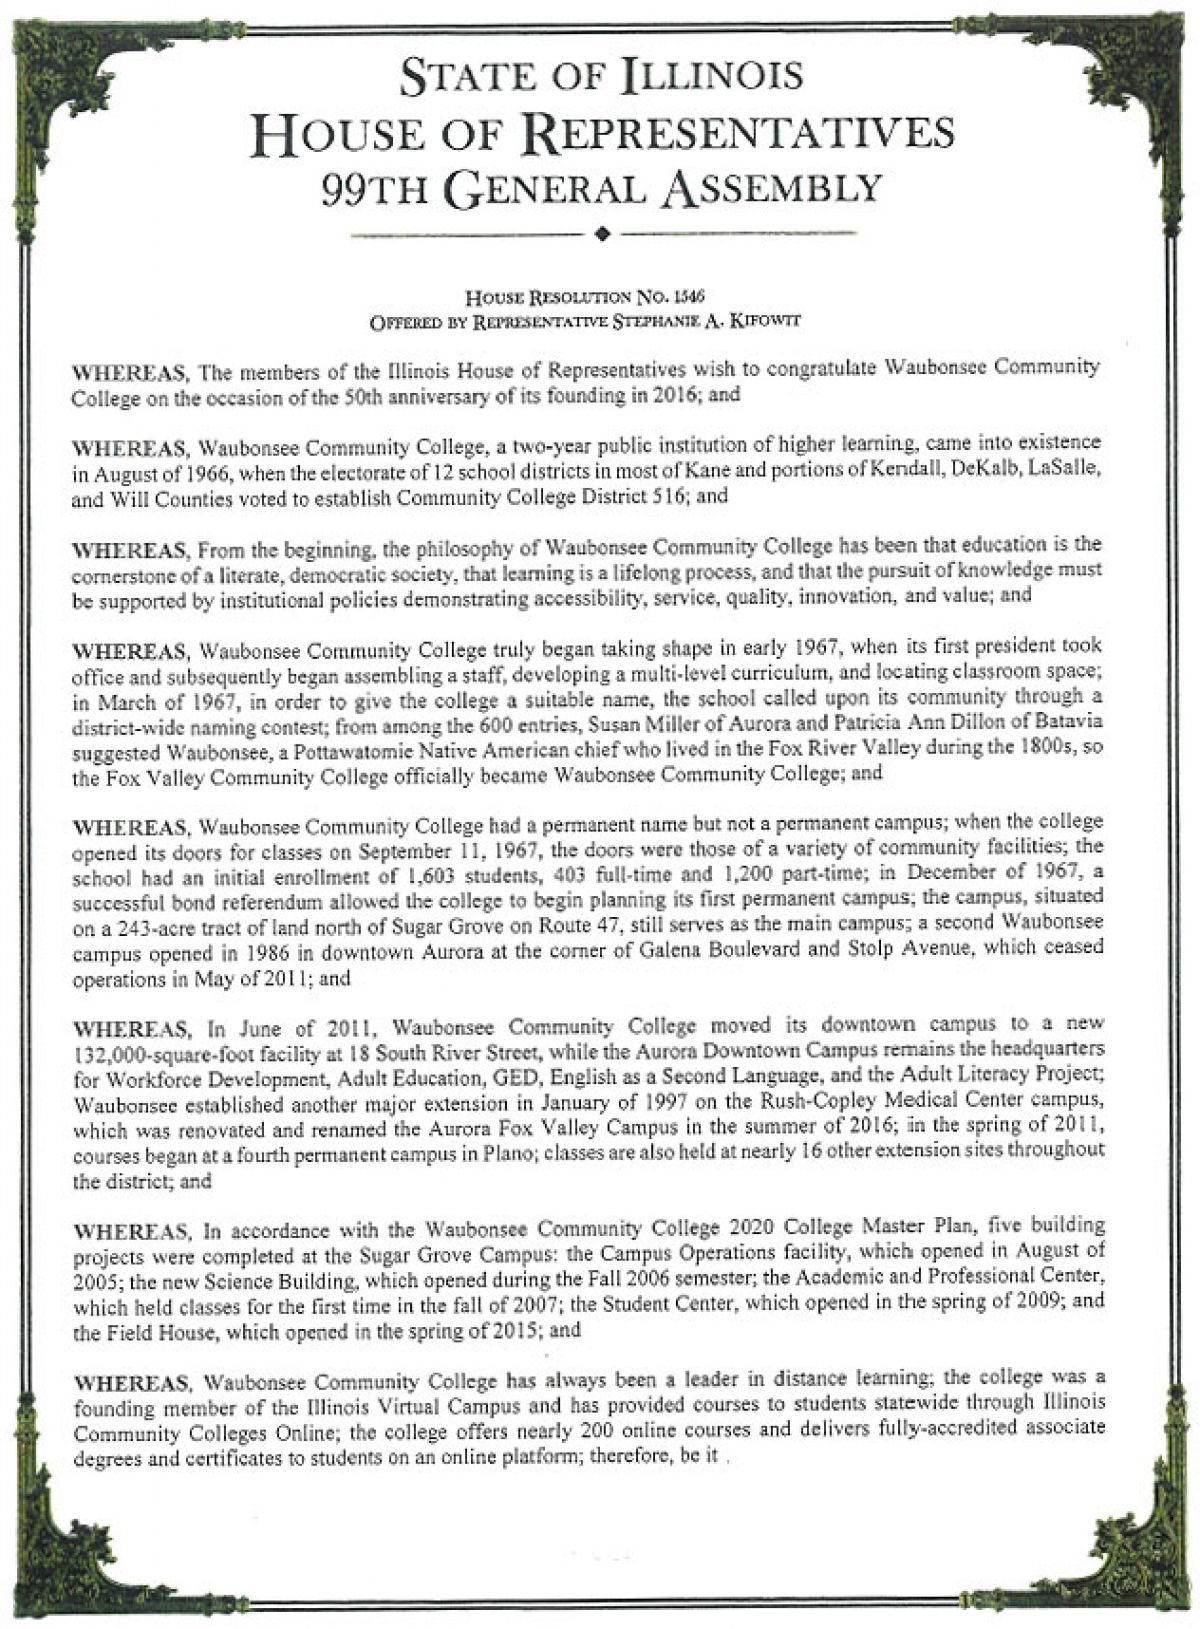 Illinois General Assembly Resolution - Representative Stephanie Kifowit, 84th District celebrating 50th anniversary (Pg. 1 of 2)